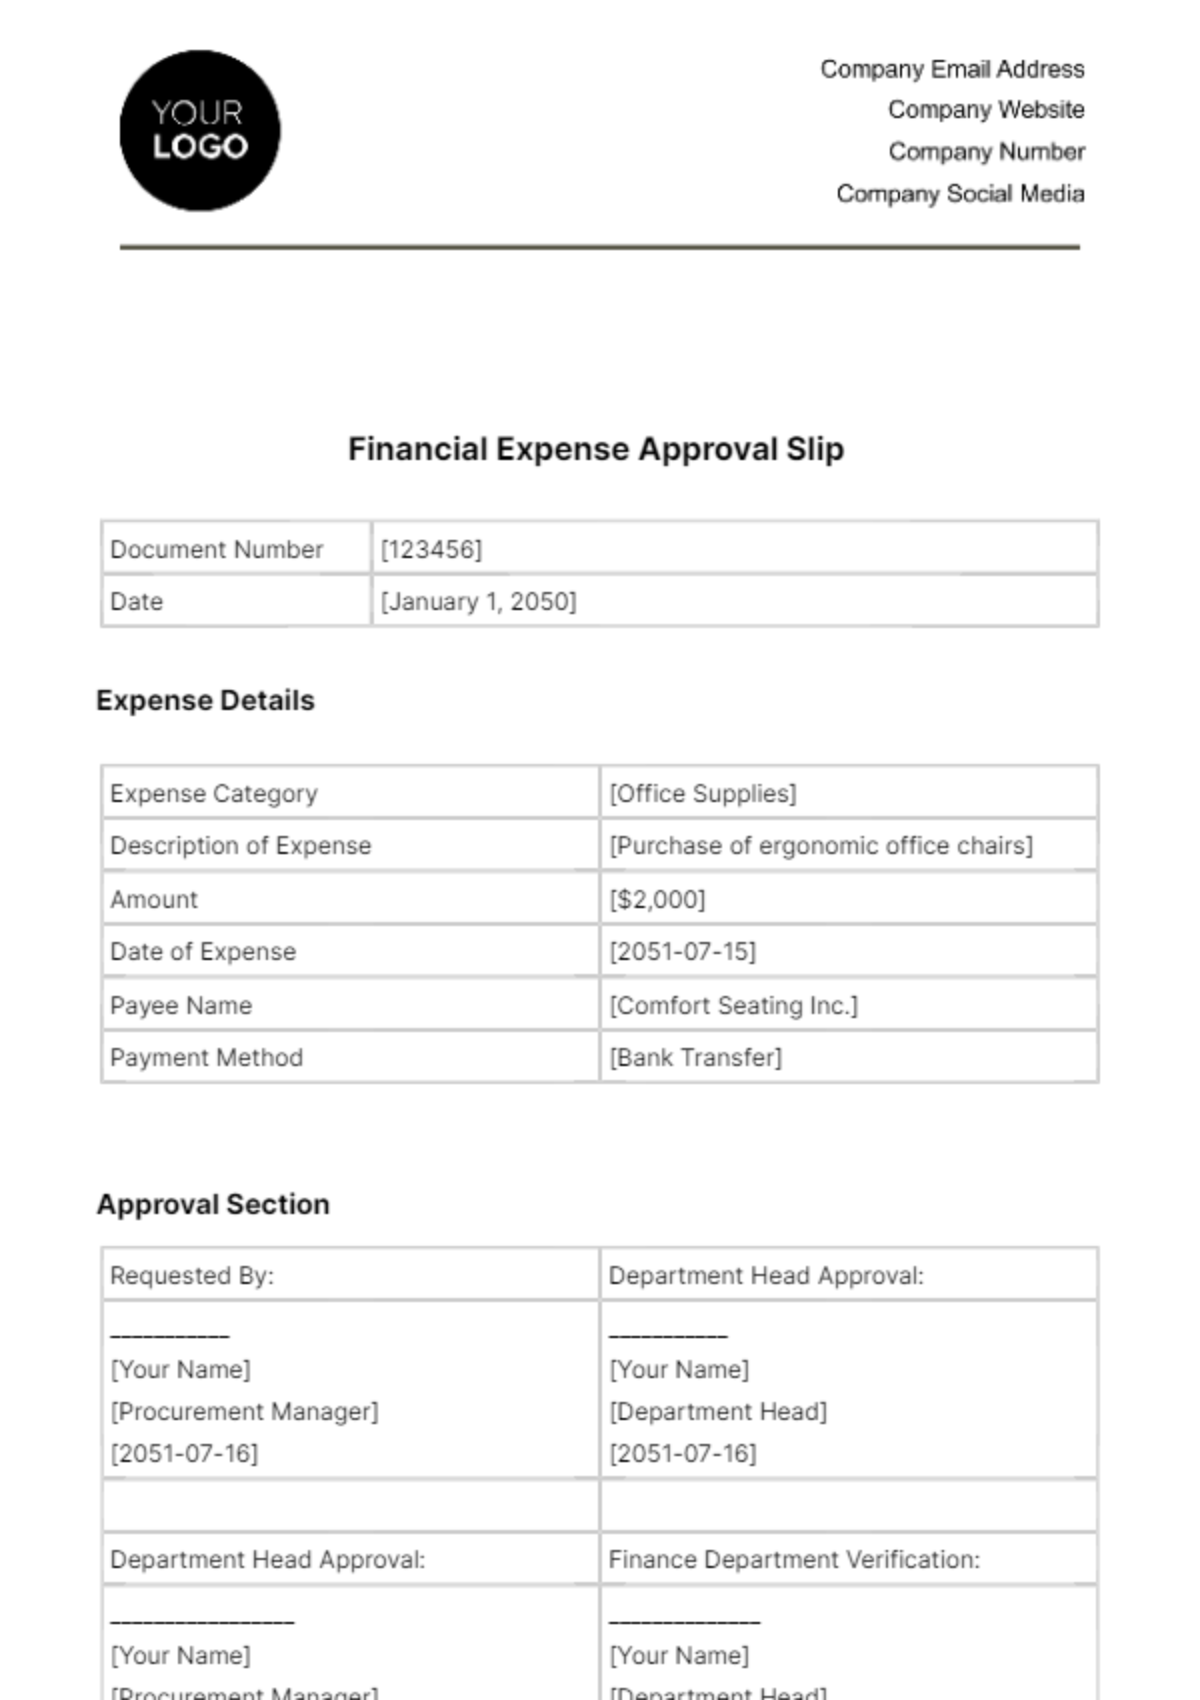 Financial Expense Approval Slip Template